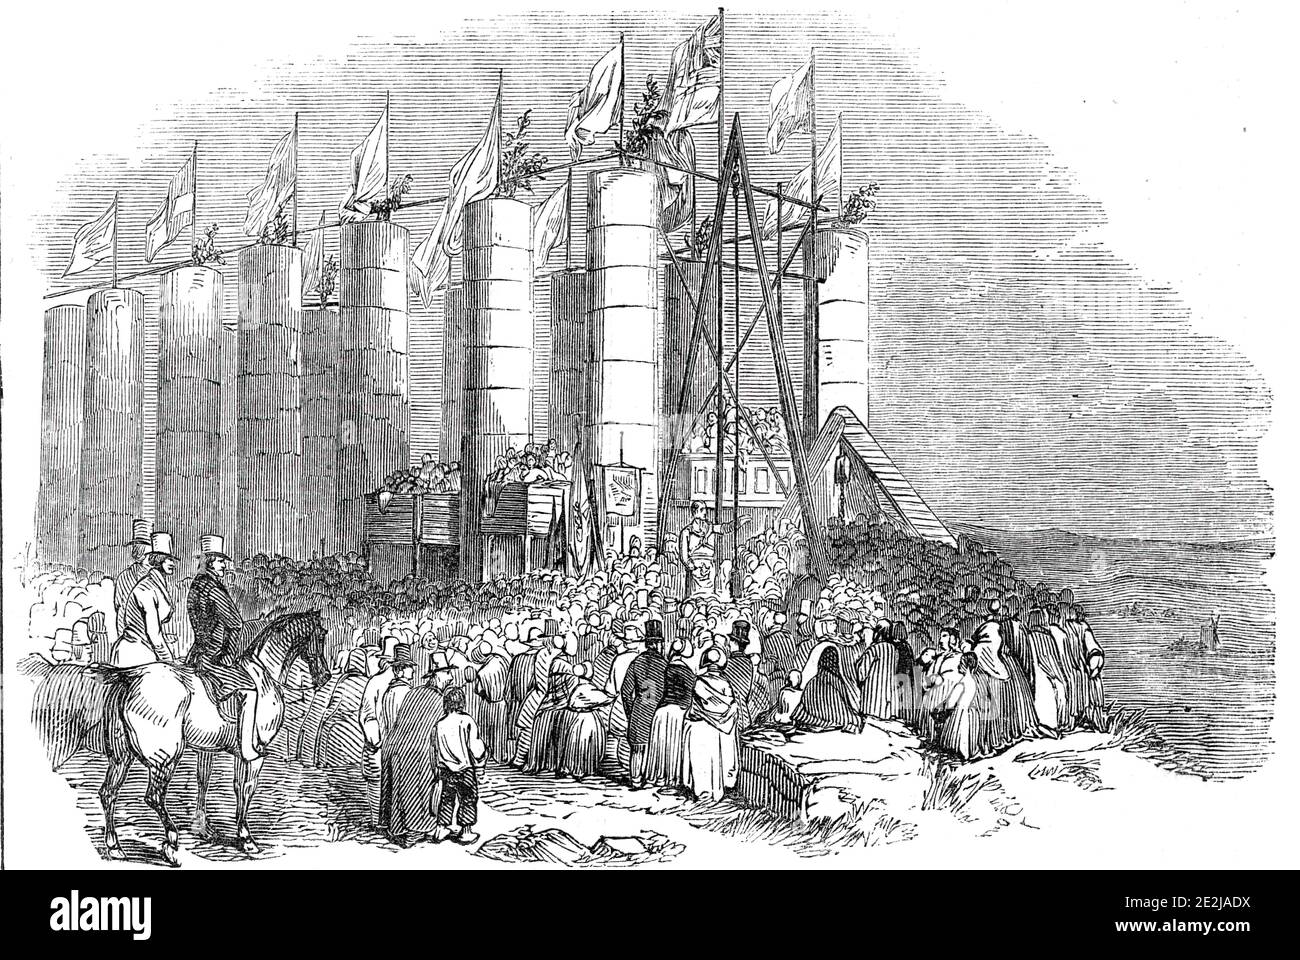 Ceremony of laying the &quot;Foundation Stone&quot; of the Durham Monument, on Penshaw Hill, 1844. The Penshaw Monument in Sunderland, County Durham, was built to commemorate John Lambton, 1st Earl of Durham, Governor-General of British North America. '...the Grand Master, the Earl of Zetland...came up in his radiant costume, with great dignity, preceded by his regal banner, and the Grand Sword Bearer, and followed by the Ionic light, the deputy Grand Master, the Rev. R. Green, Grand Chaplain, and Grand officers, with plumb, line... the ceremony was immediately commenced by the upper foundatio Stock Photo